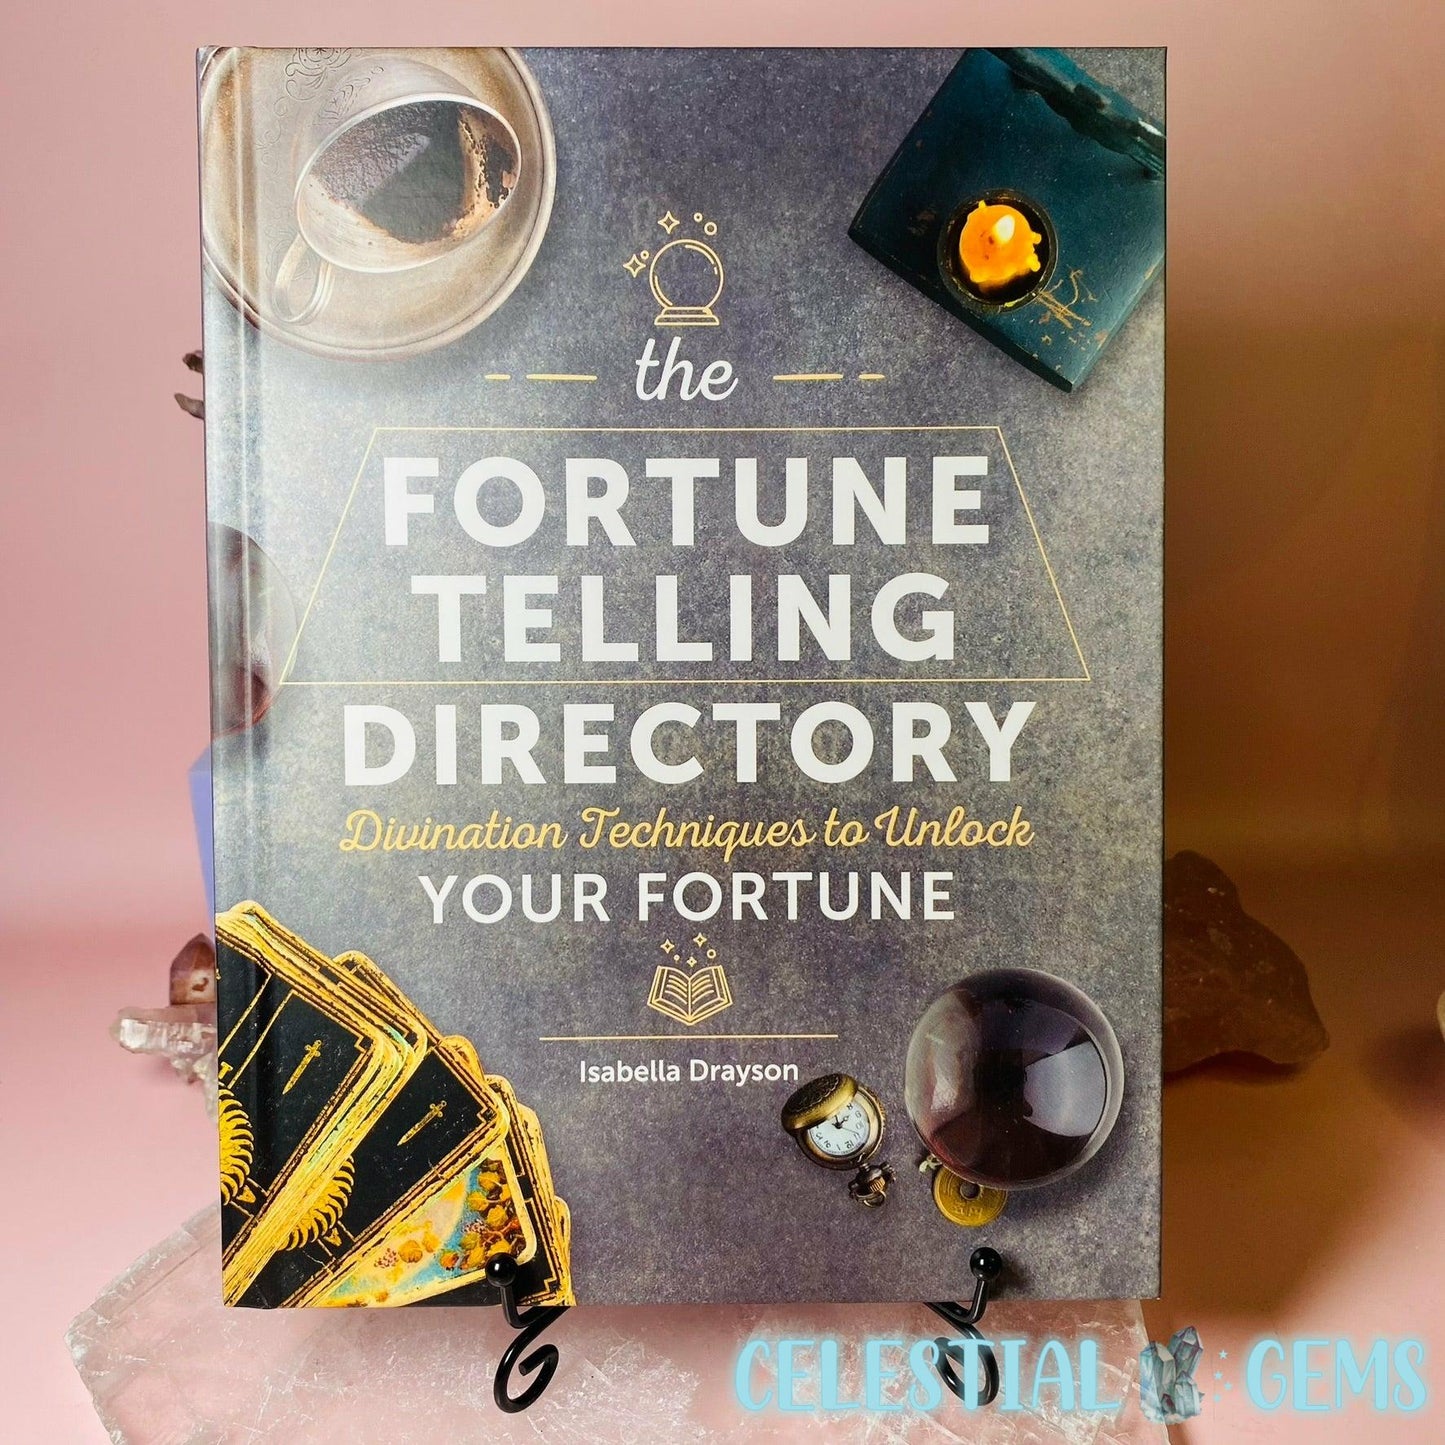 The Fortune Telling Directory Book by Isabella Drayson